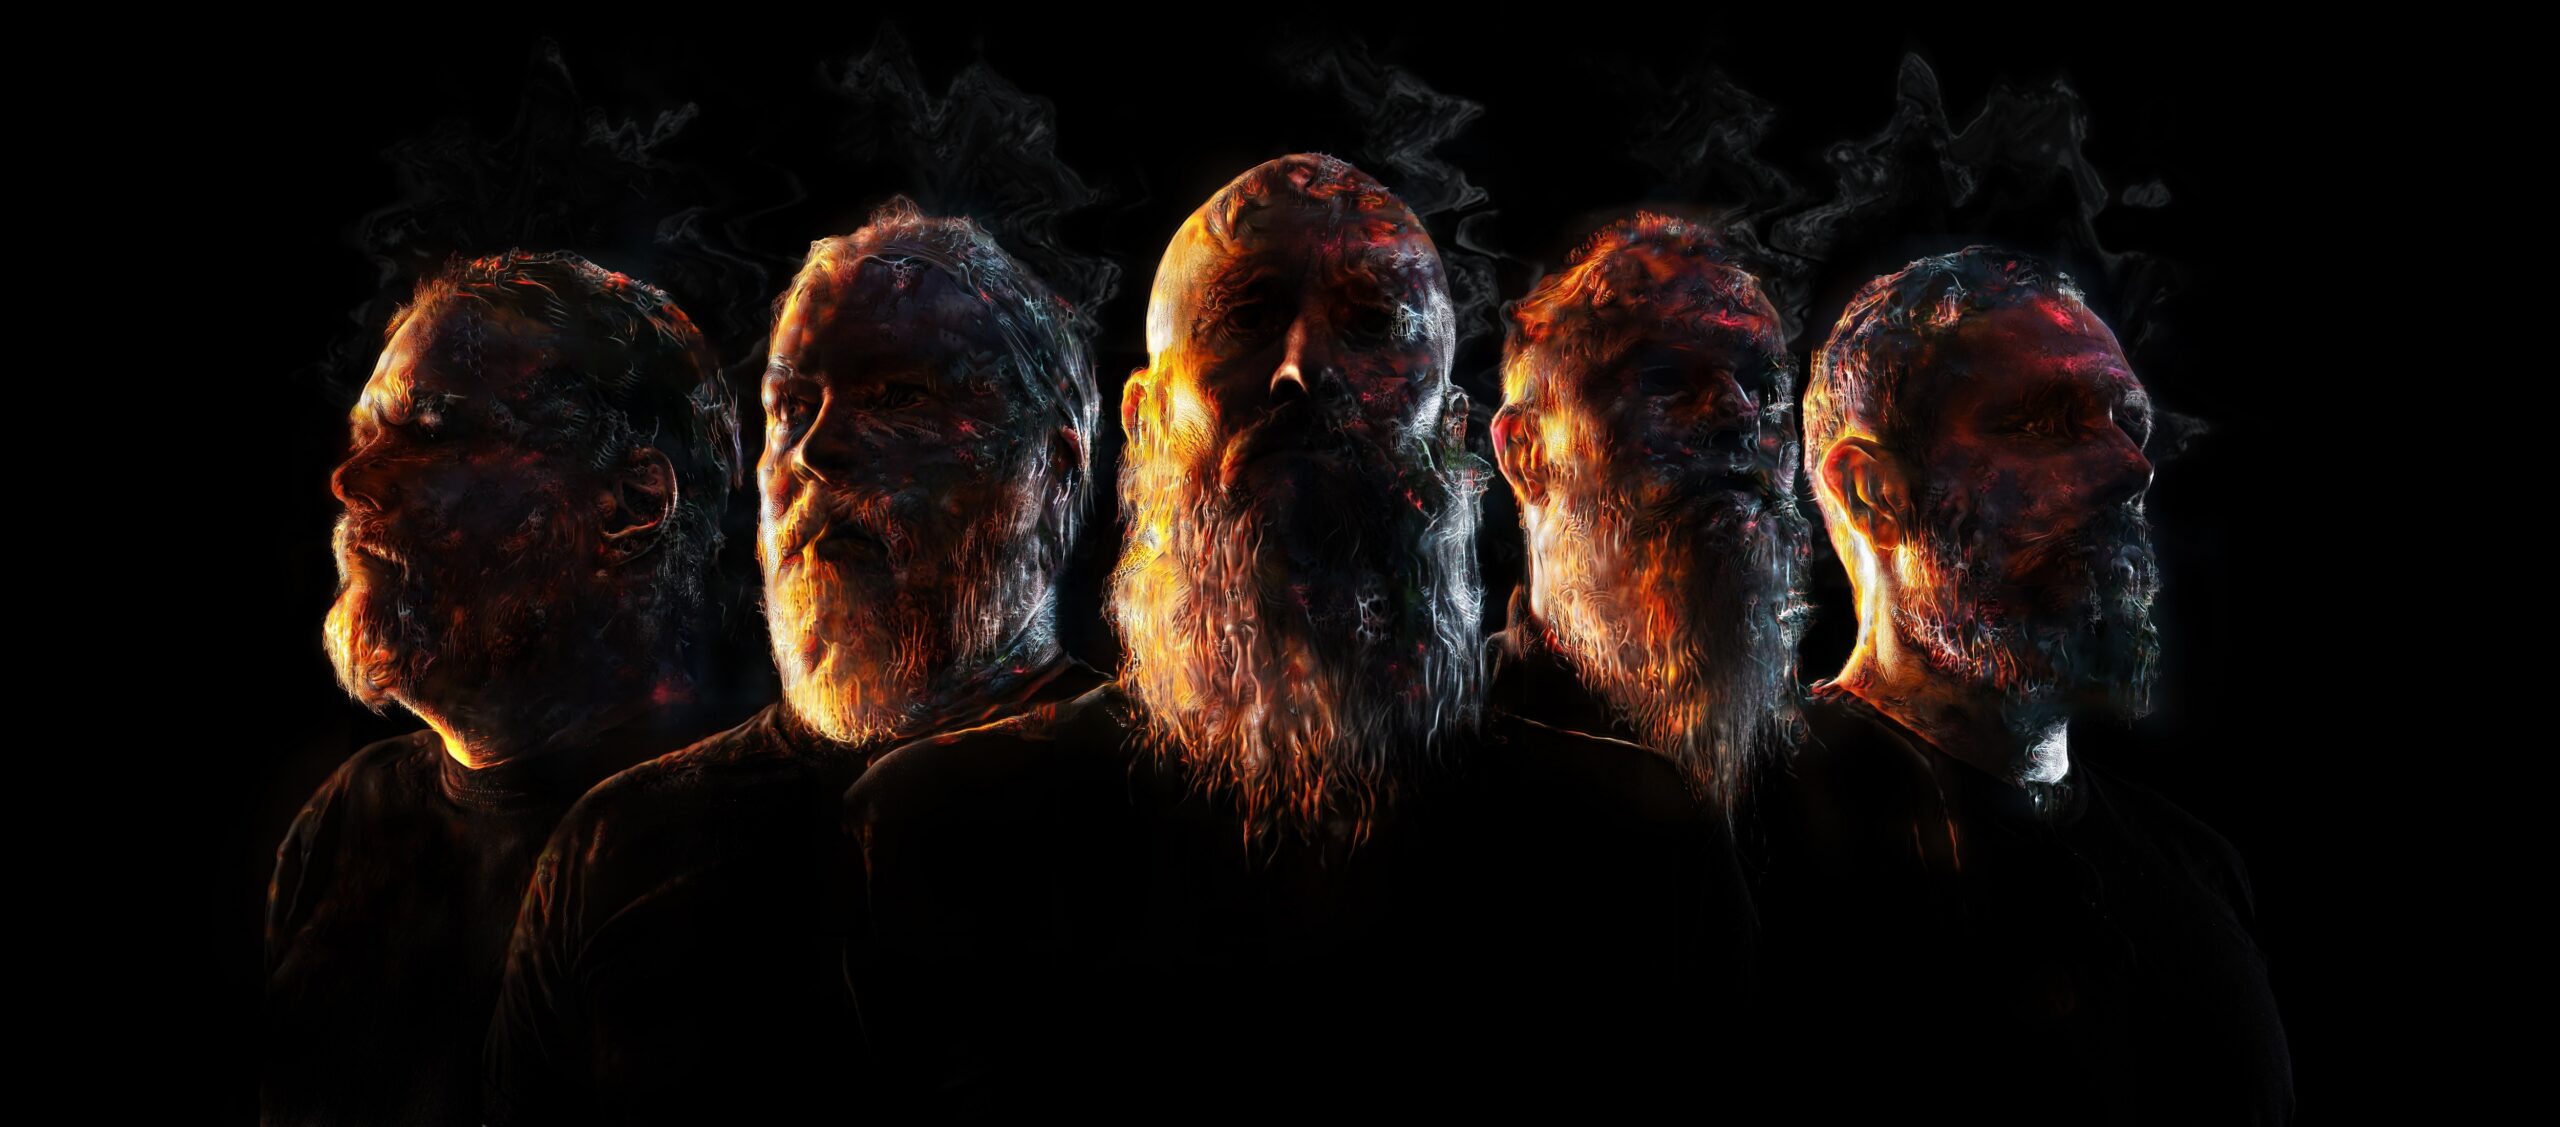 Read more about the article MESHUGGAH: Ακούστε το νέο τους single με τίτλο “The Abysmal Eye”!